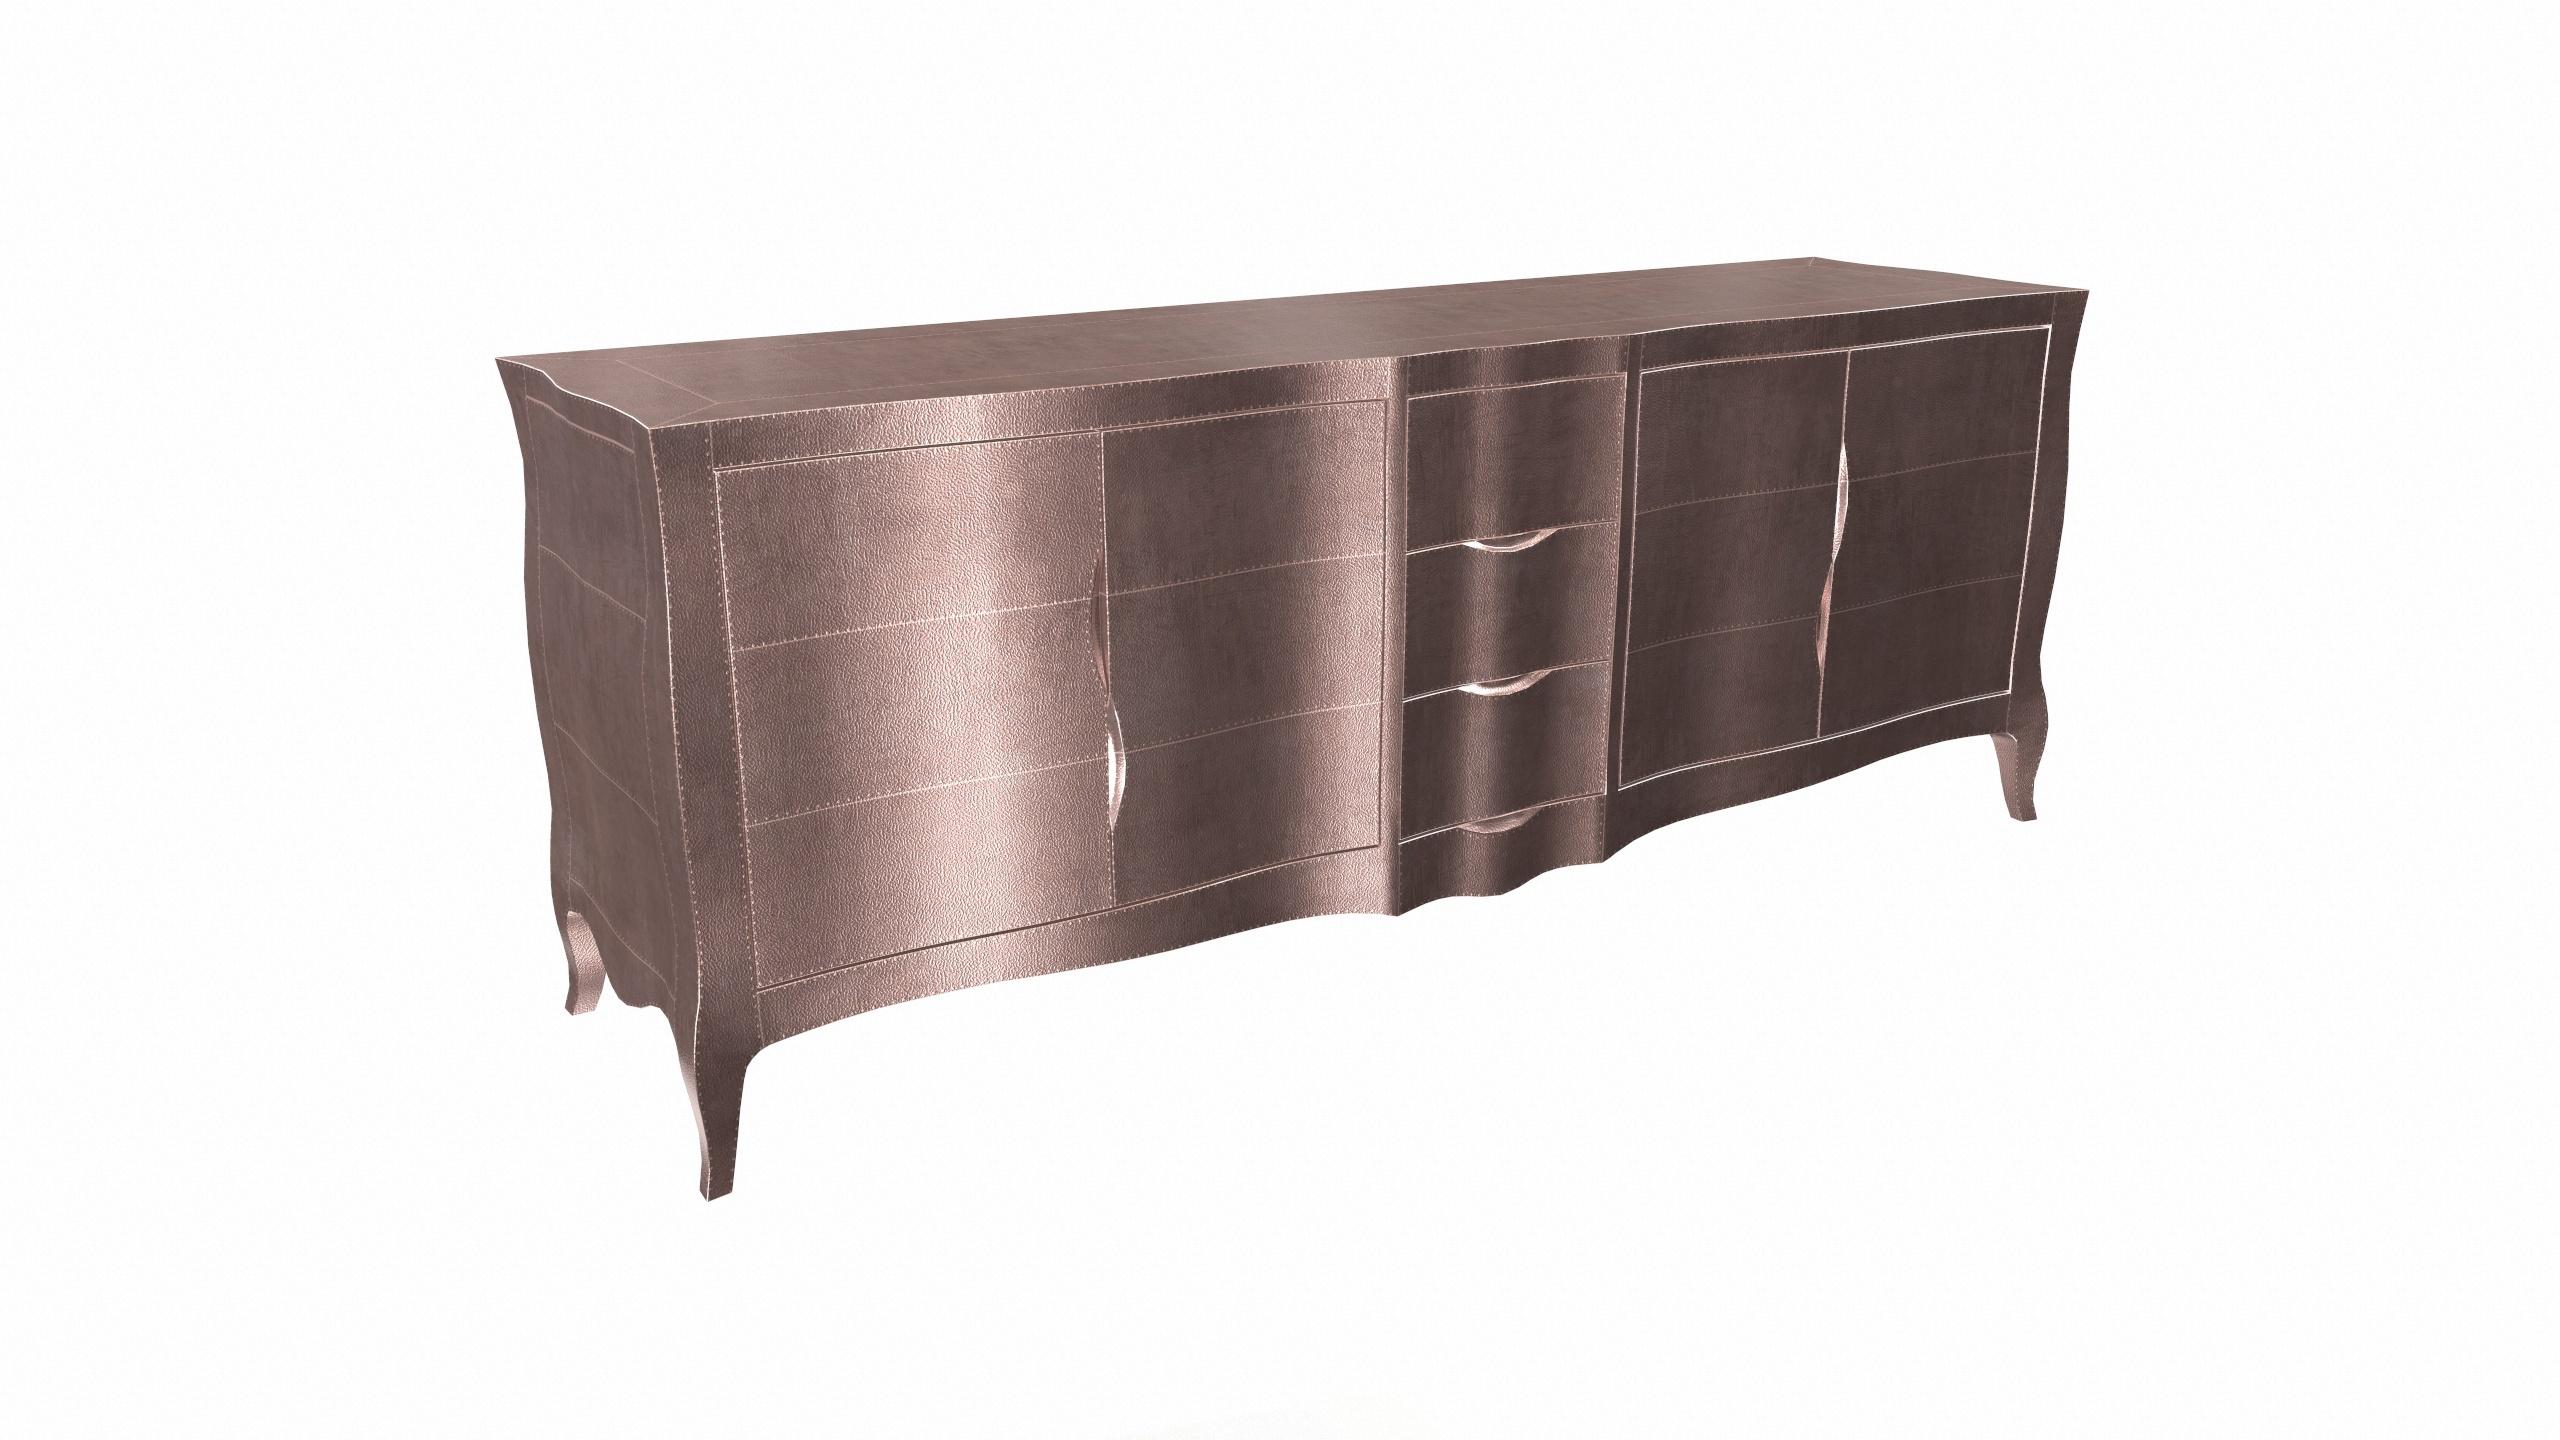 Contemporary Louise Credenza Art Deco Bookcases in Fine Hammered Copper by Paul Mathieu For Sale